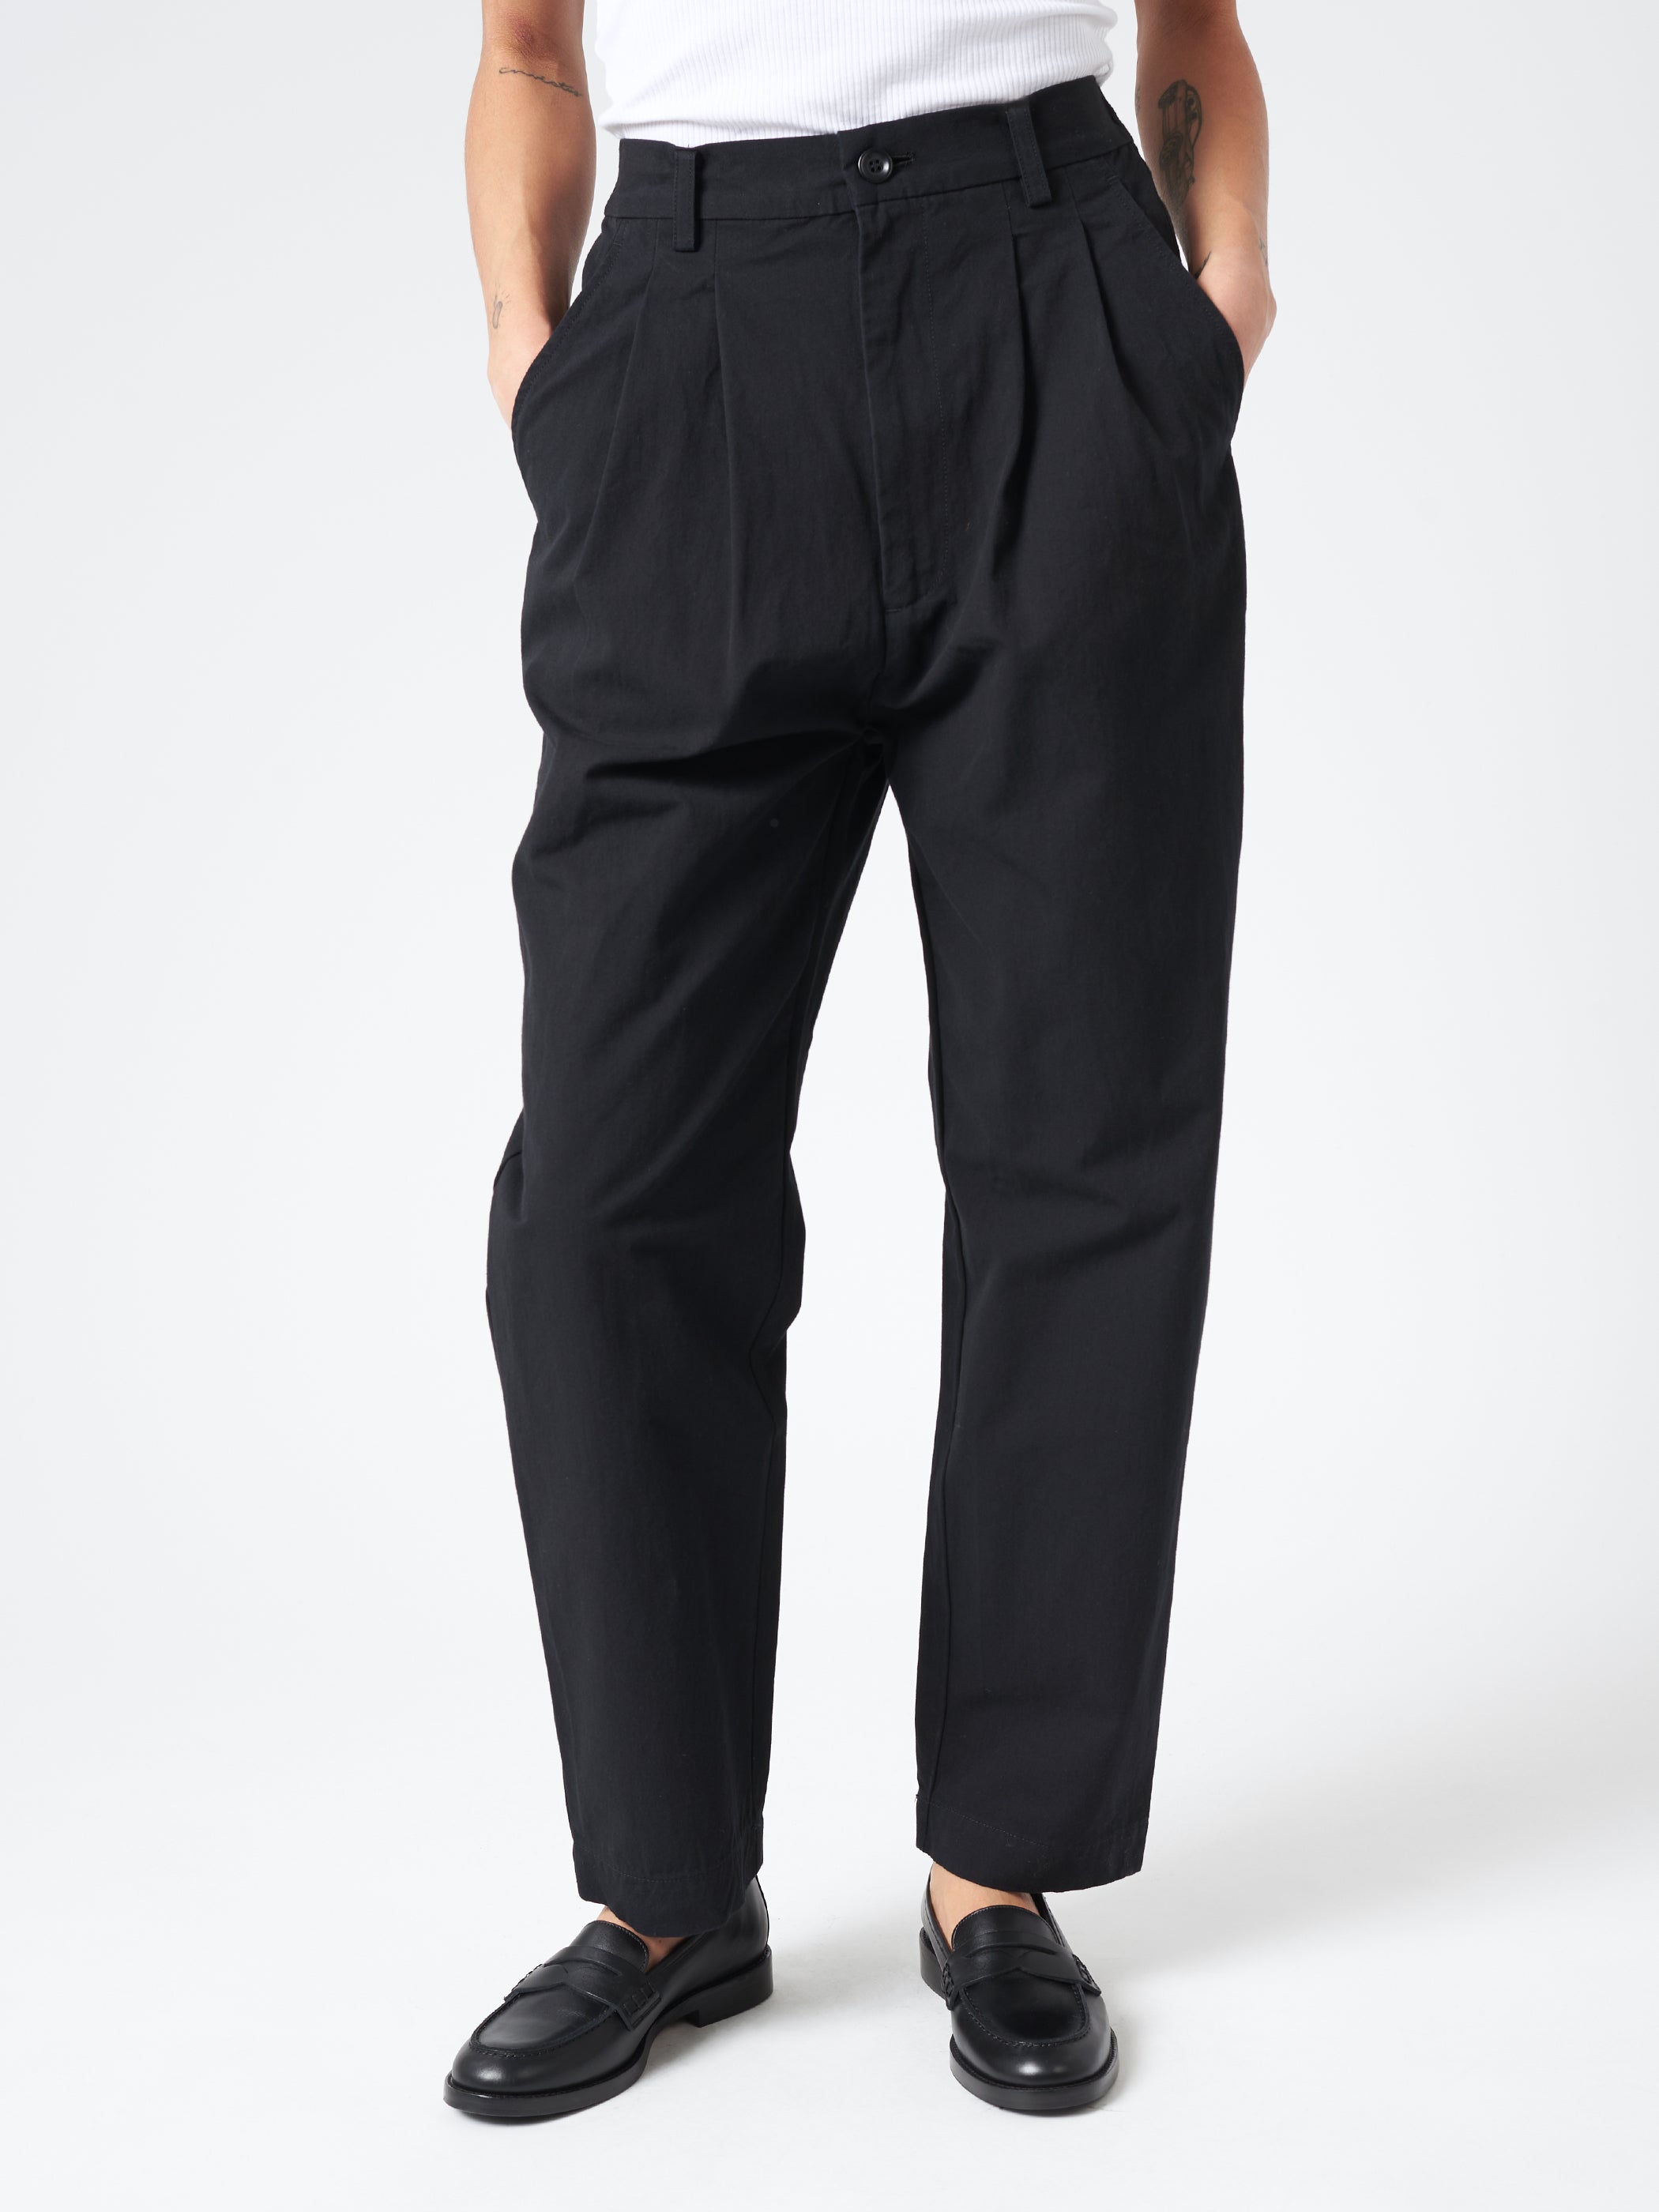 Tapered Tuck Pants